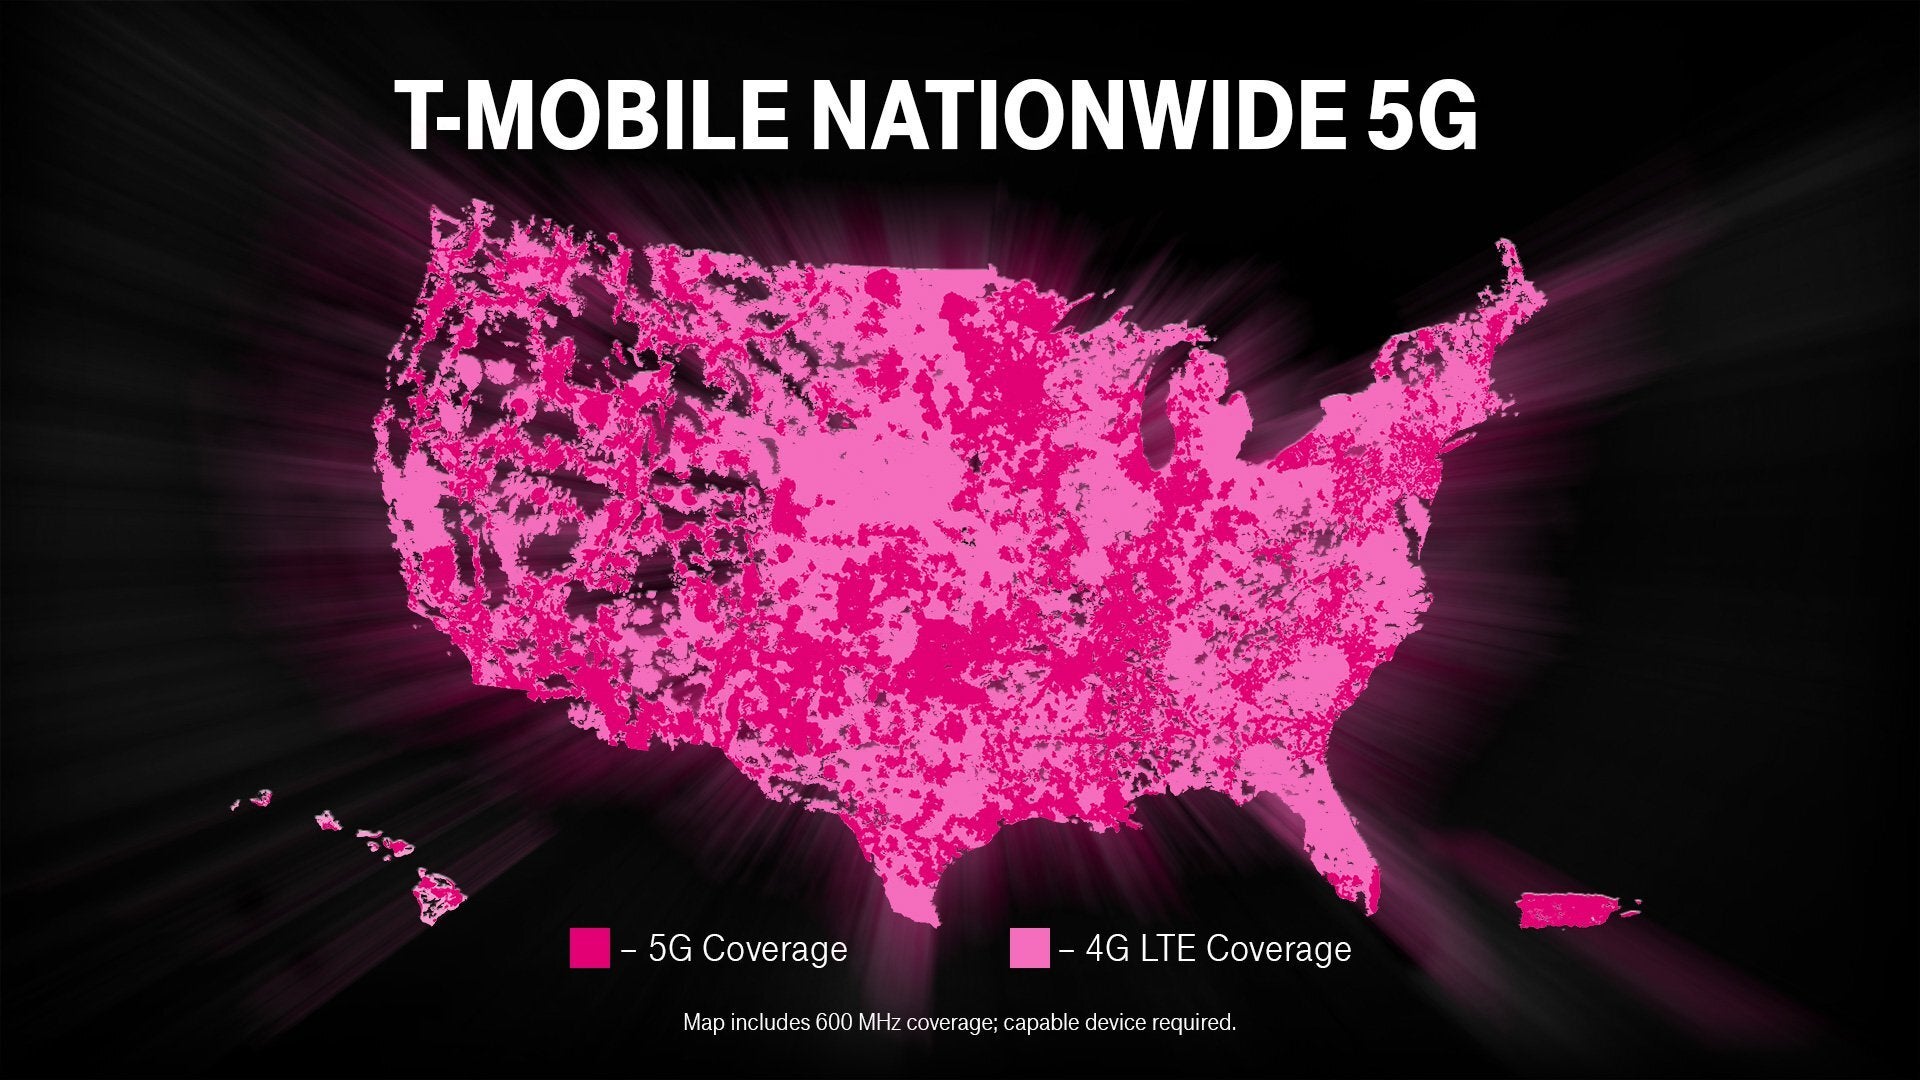 T-Mobile&#039;s 5G network now covers over 200 million Americans - Judge wants quick resolution of trial that seeks to block T-Mobile-Sprint merger